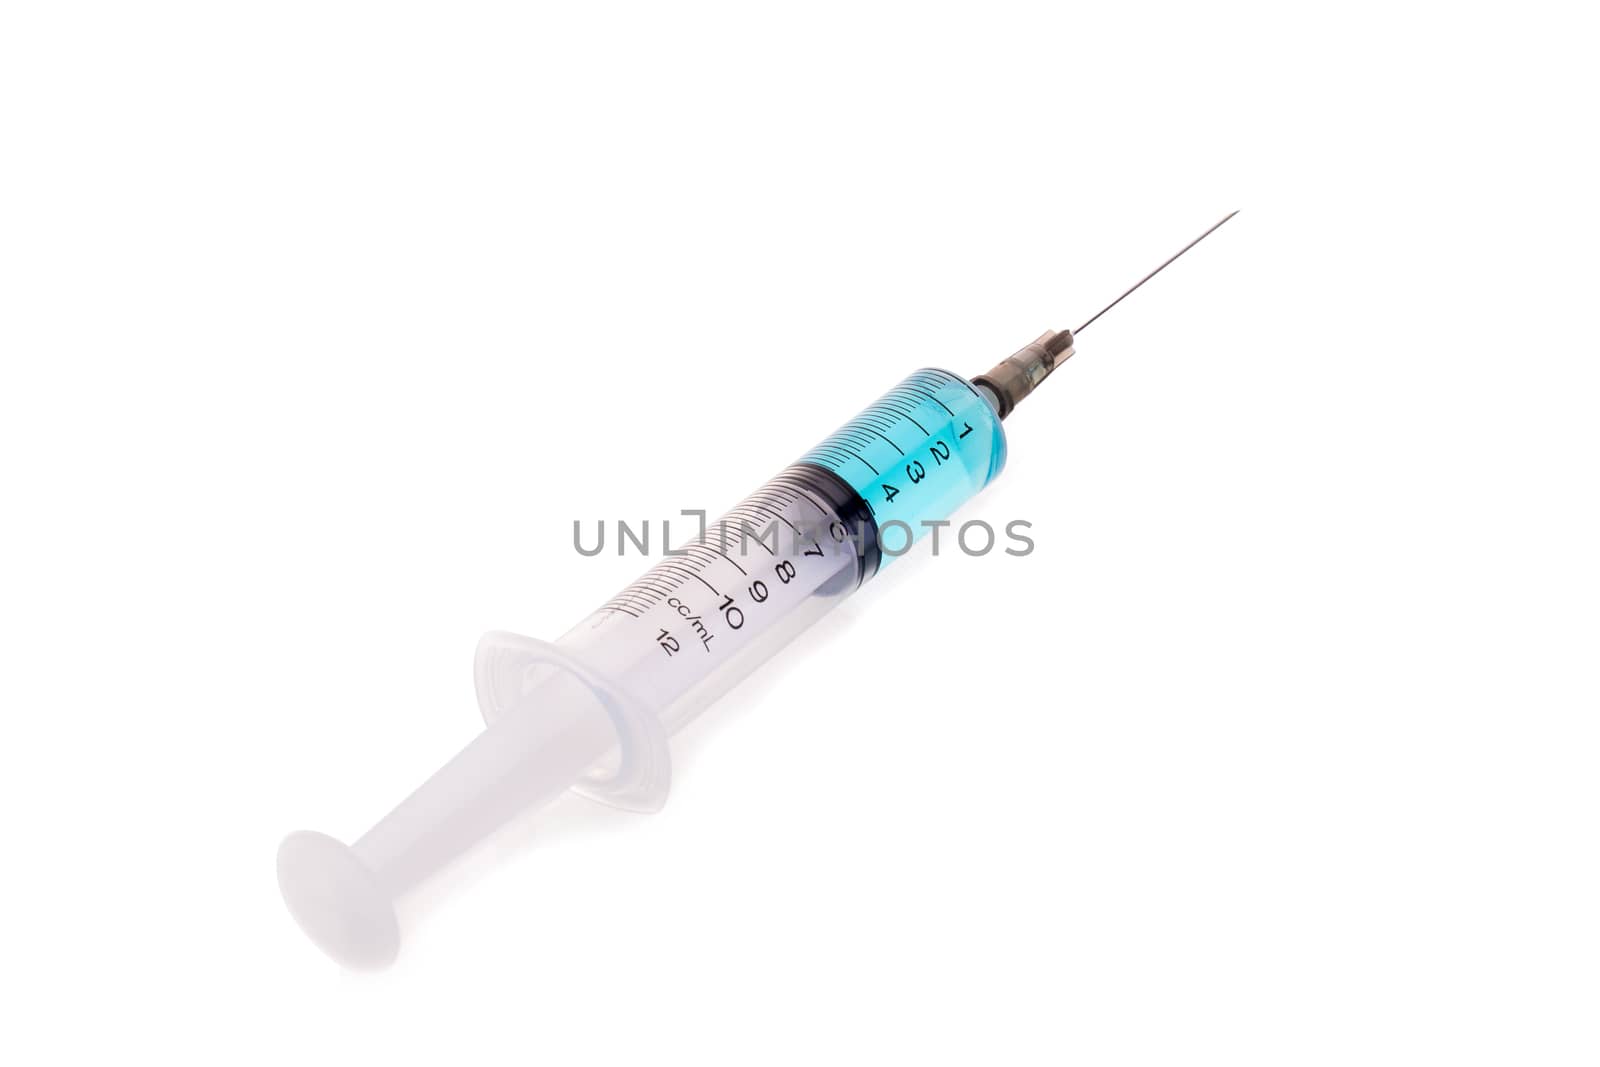 pills and plastic medical syringe on a white background by kaiskynet